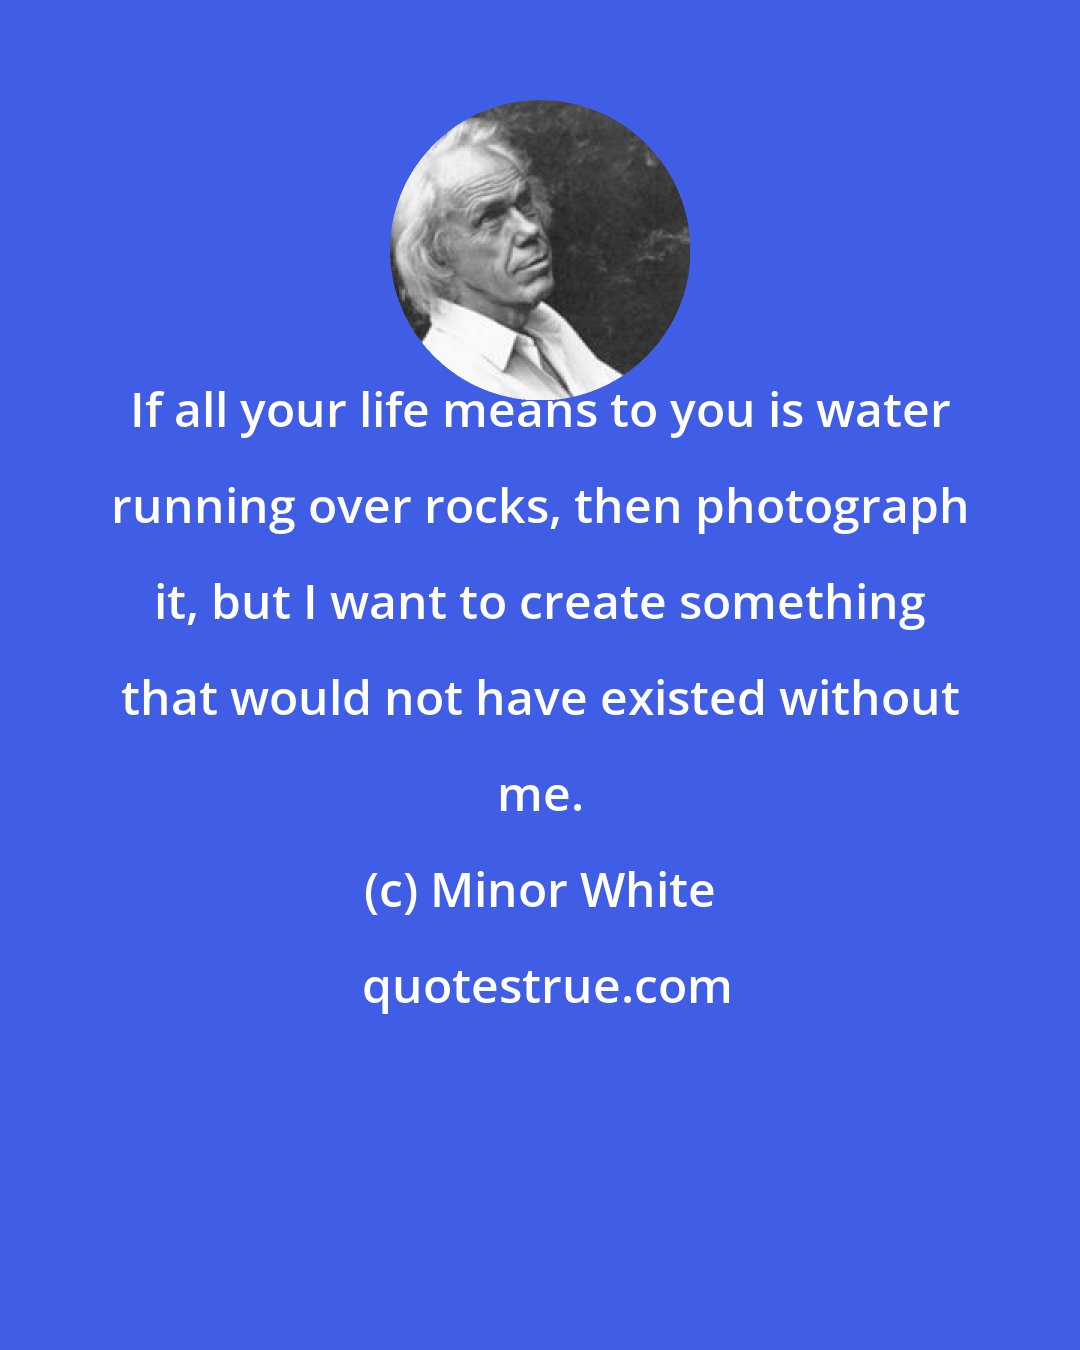 Minor White: If all your life means to you is water running over rocks, then photograph it, but I want to create something that would not have existed without me.